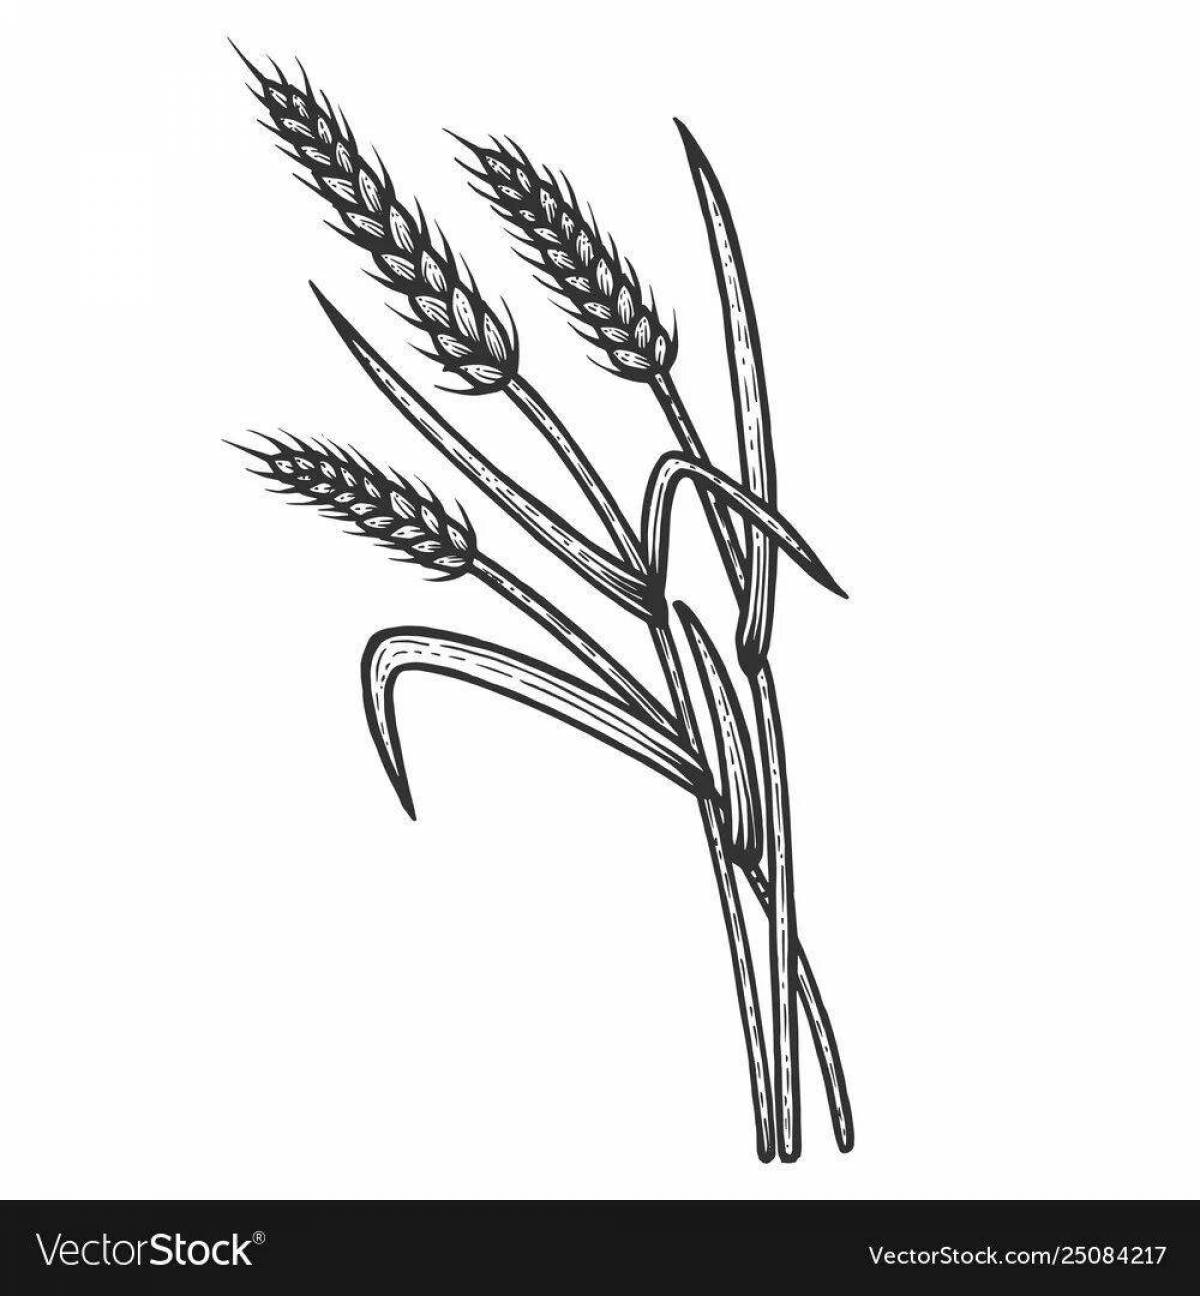 Glowing ears of wheat coloring page